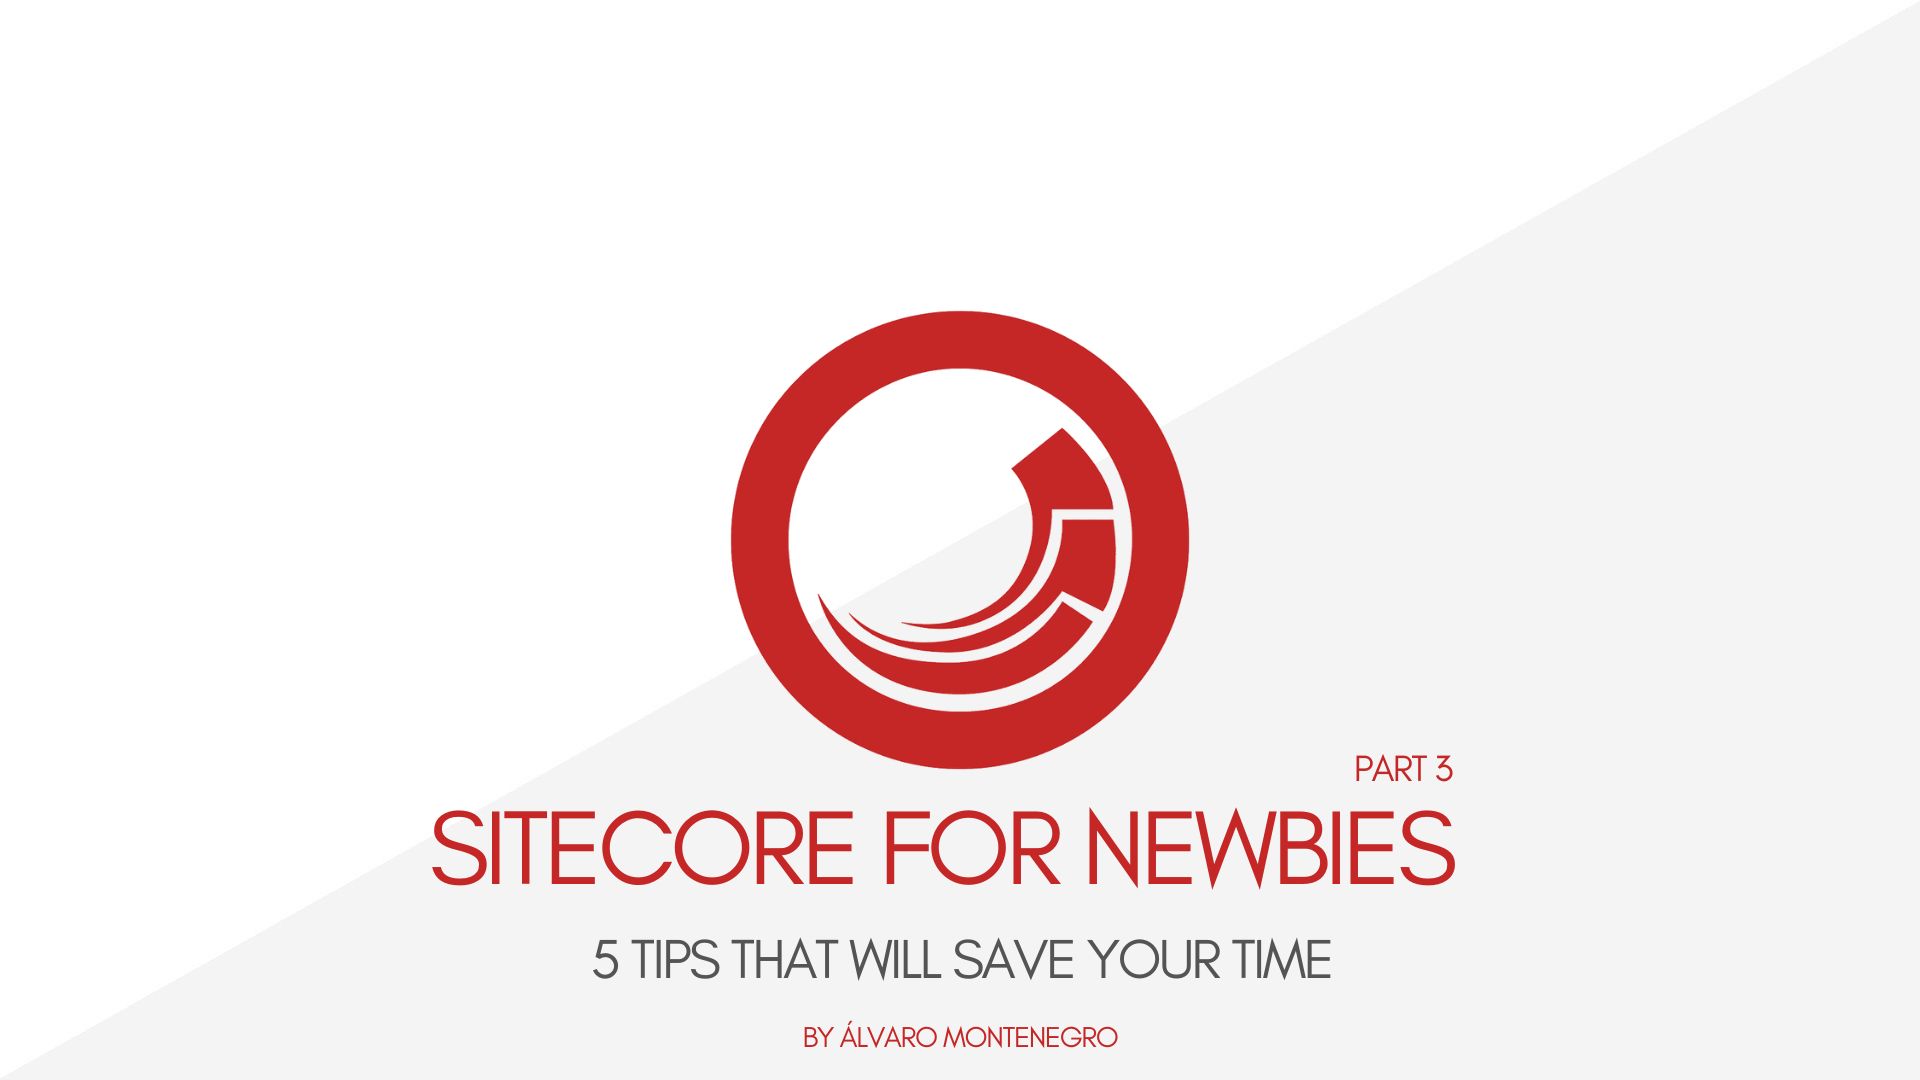 [Sitecore For Newbies] 5 tips that will save your time! – Part 3